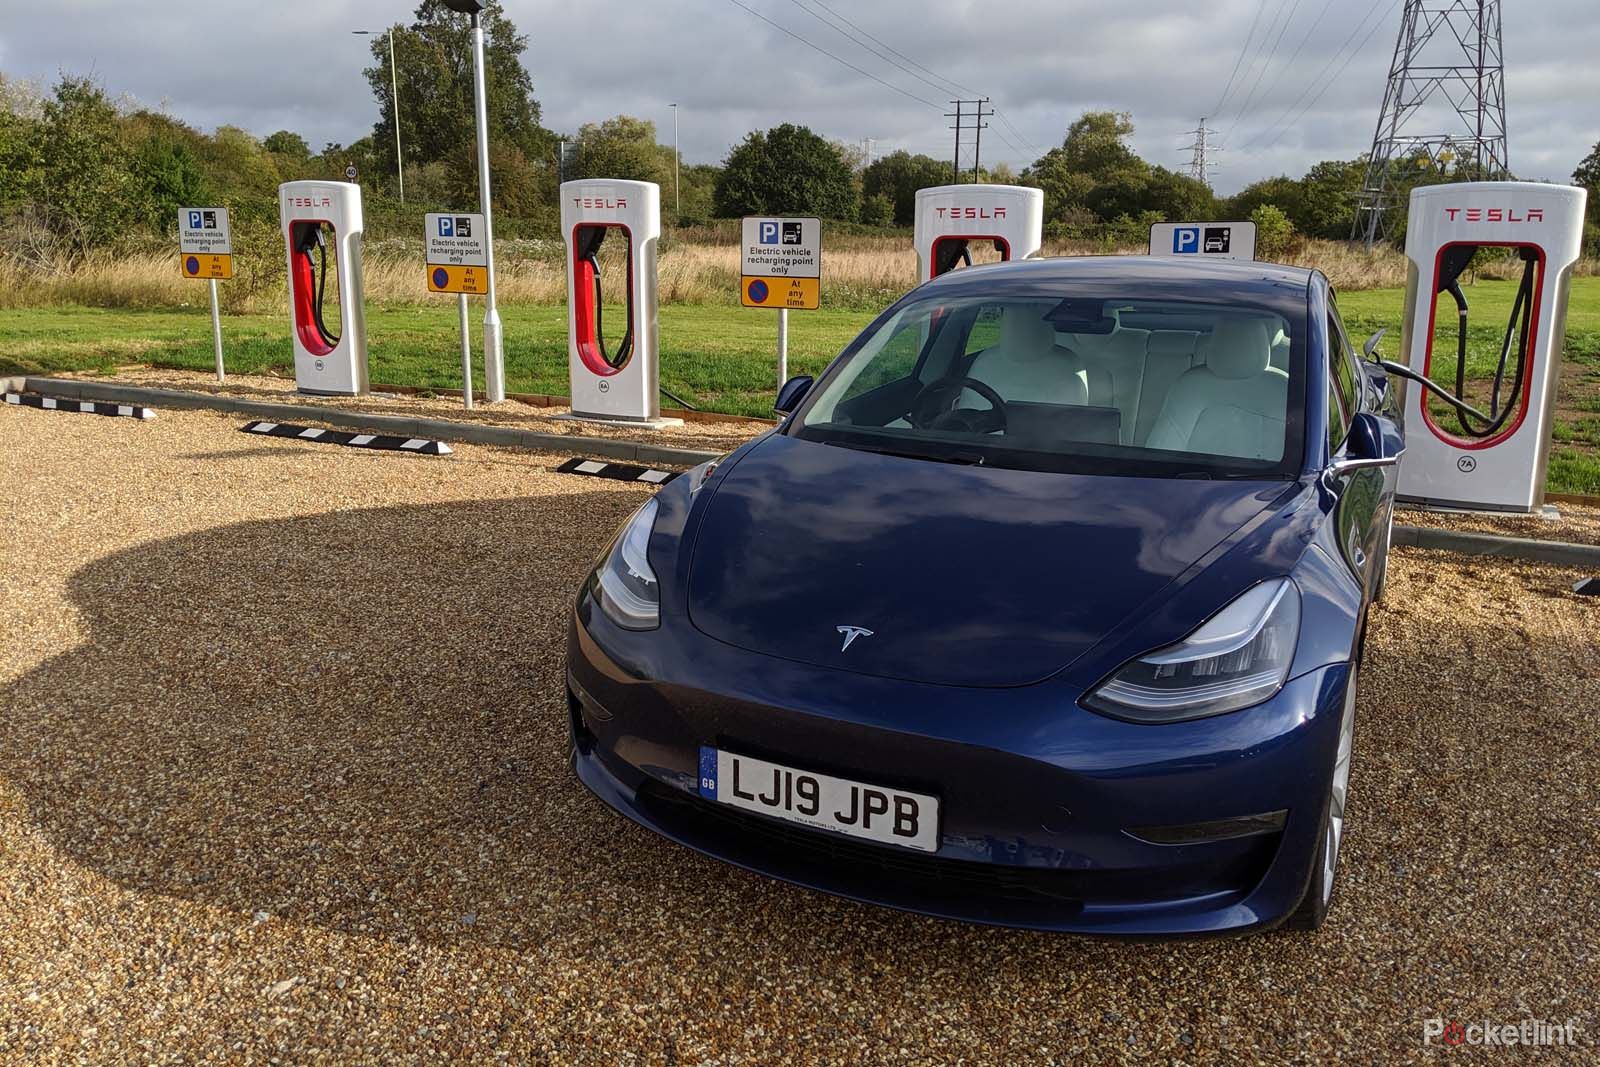 Thinking of switching to an electric car? Here's what you need to know